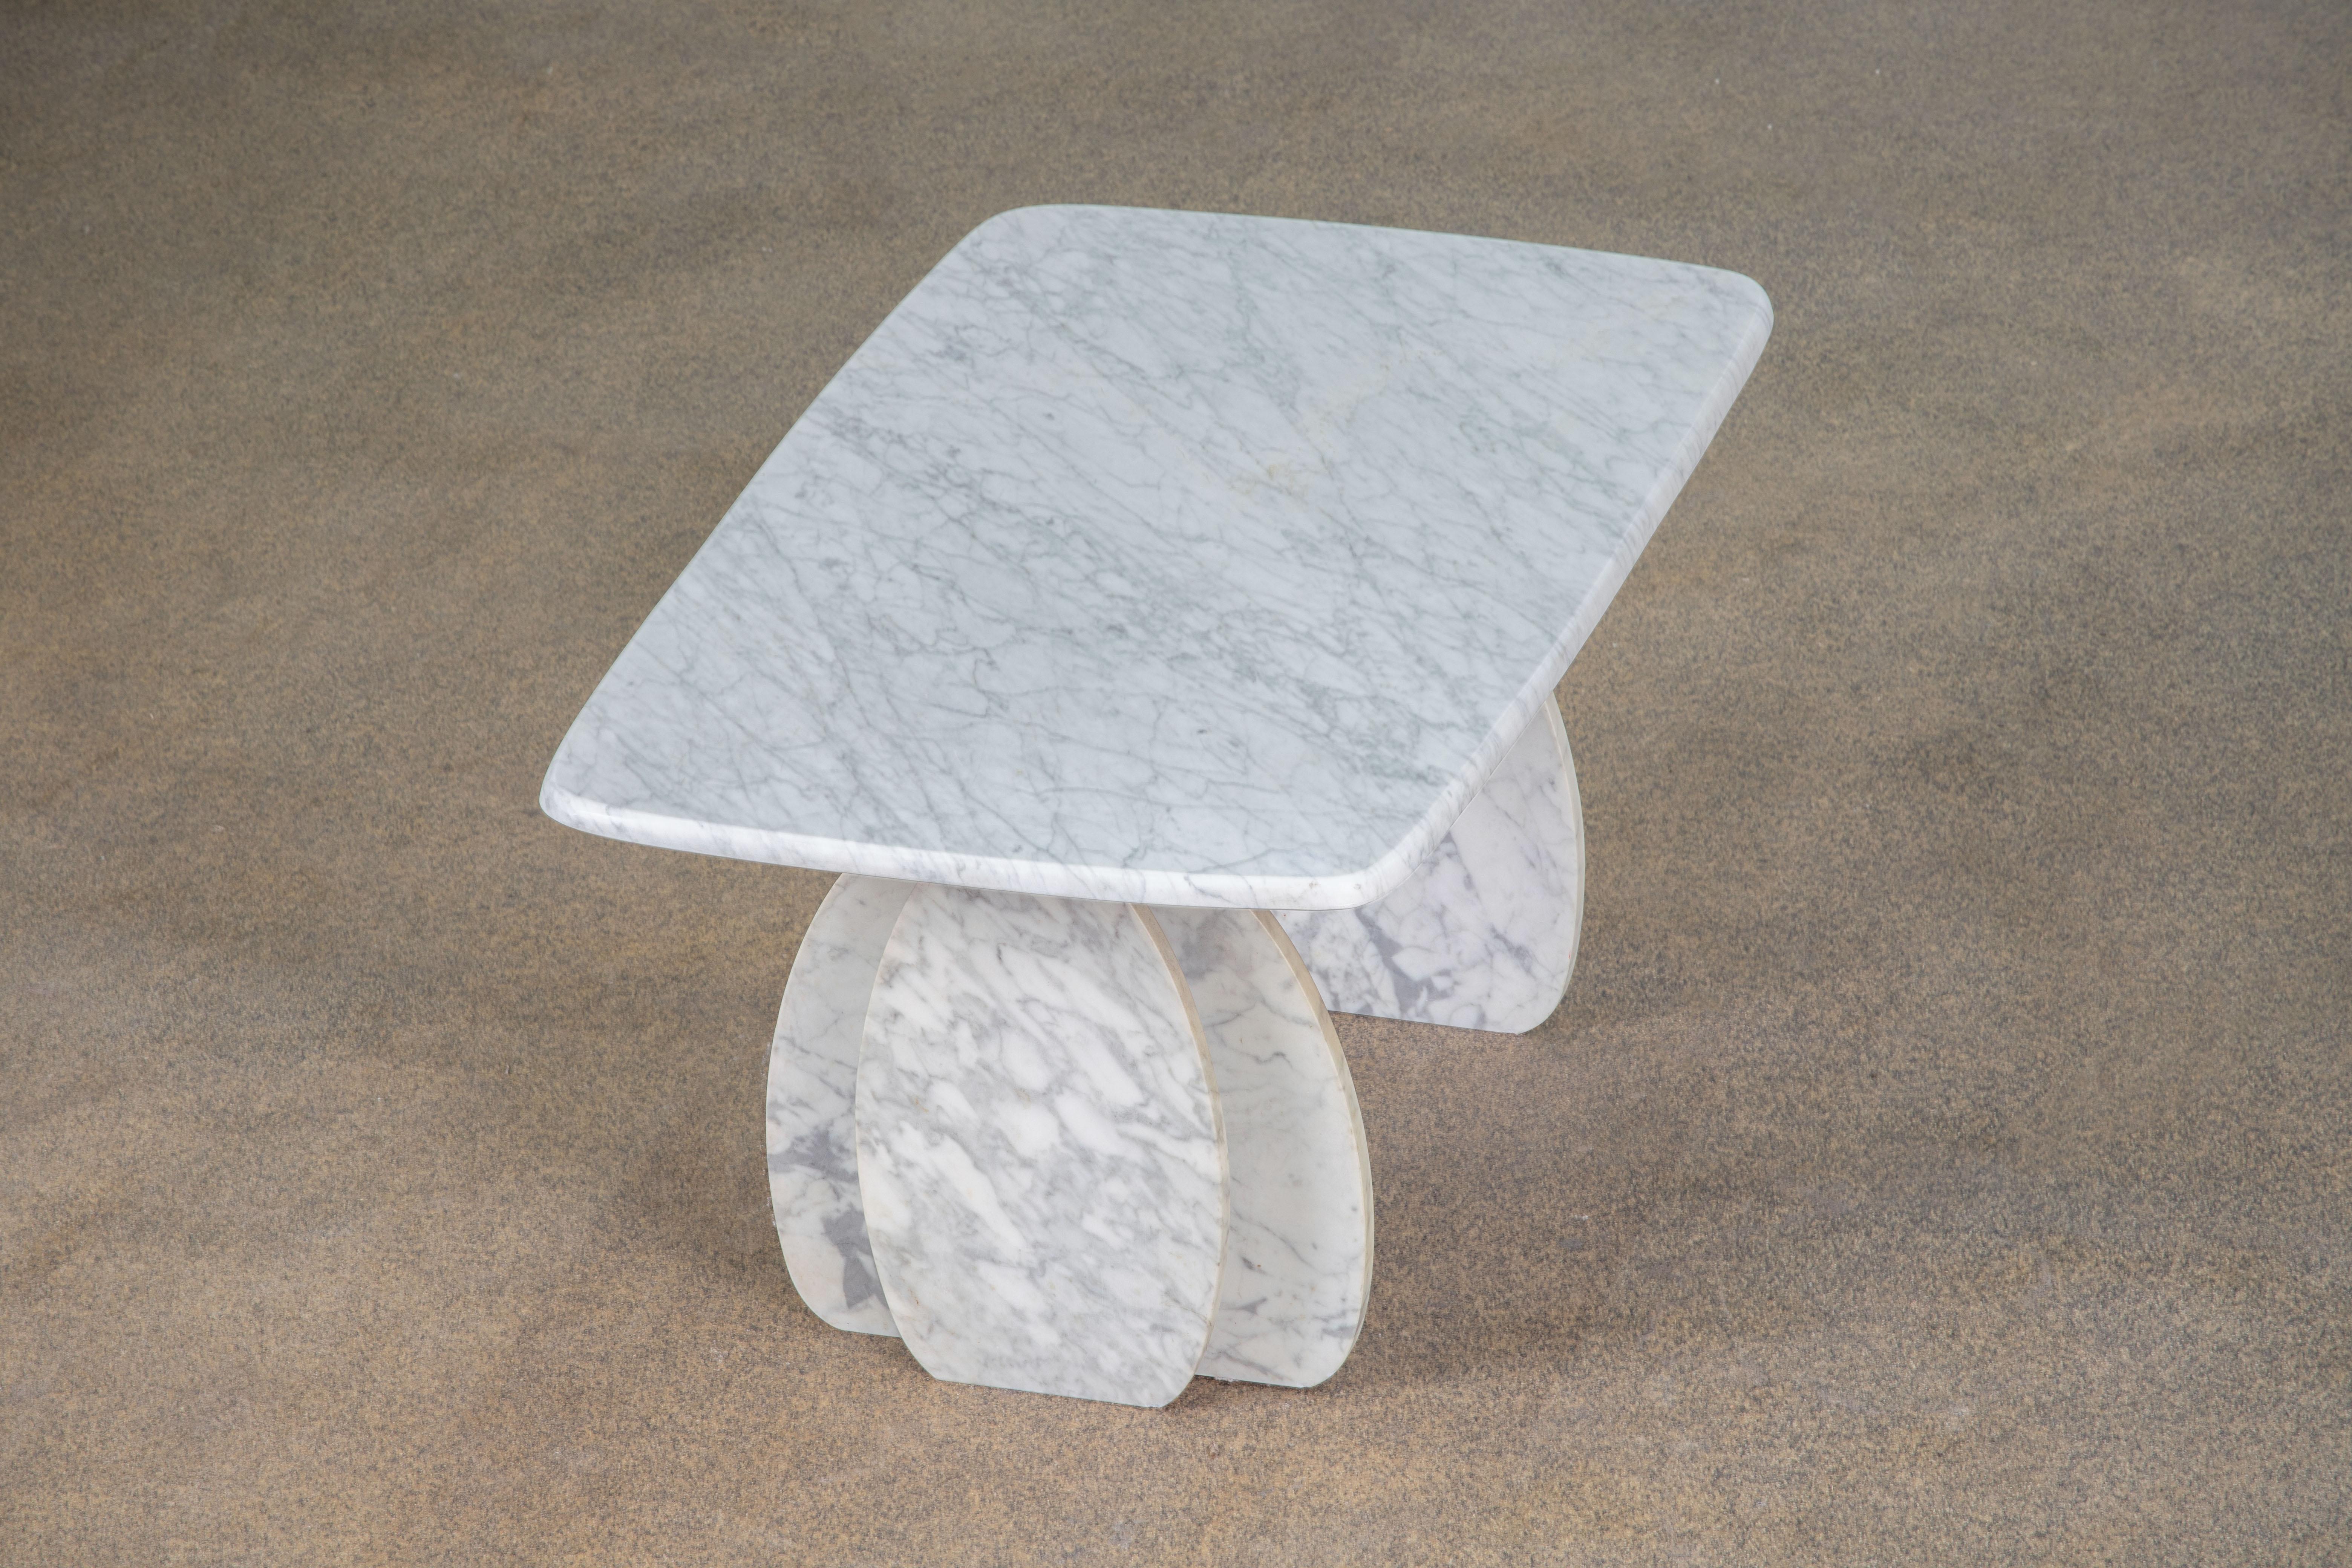 Beautiful white marble table.

The heavy eye-shaped top rests on two marble V blocks.